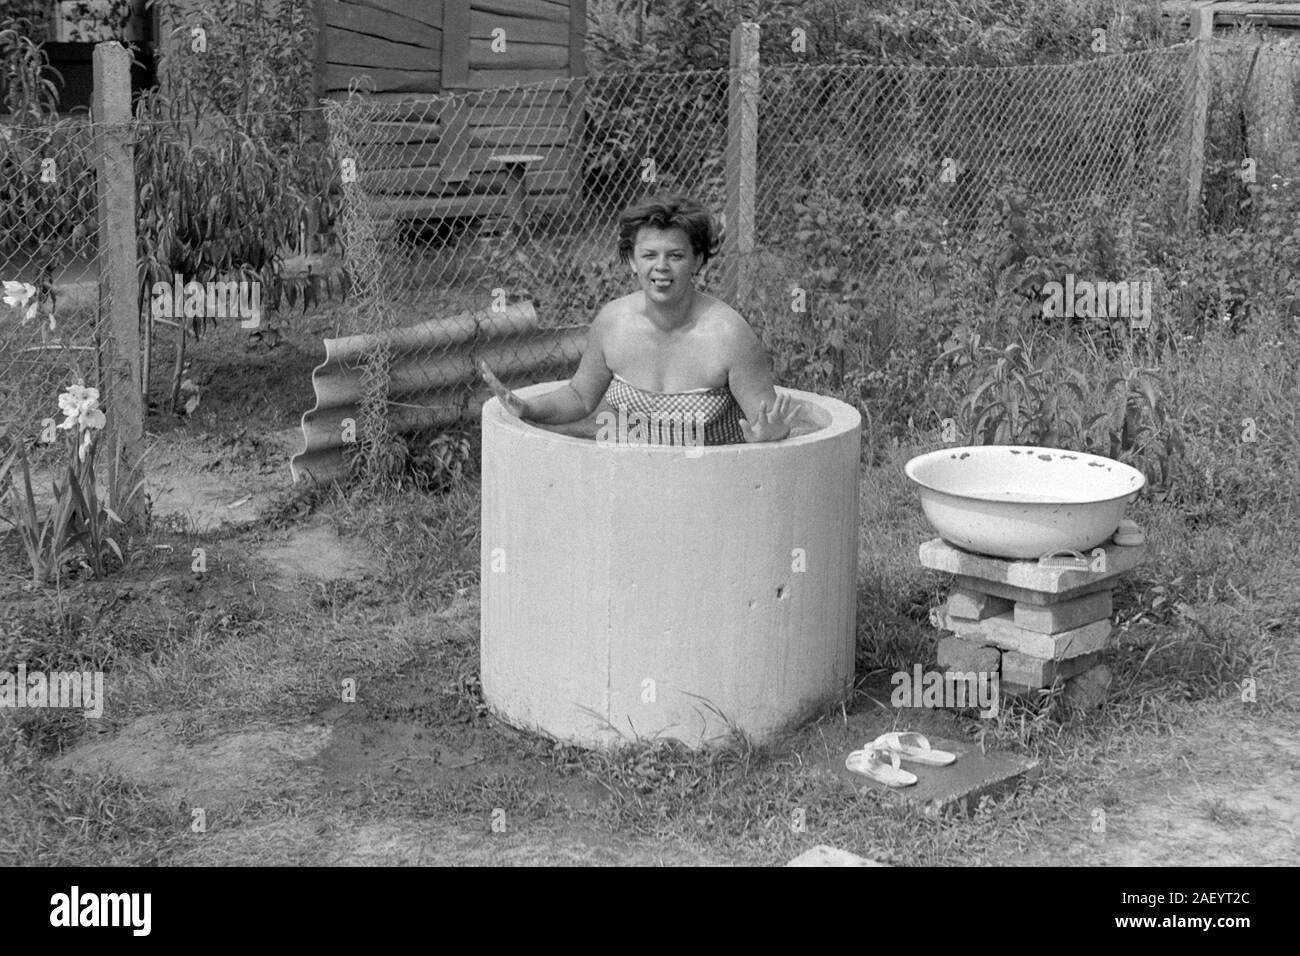 woman in bathing costume bathes in garden using improvised pool made from a section of drain pipe using water heated on an open fire 1960s hungary Stock Photo